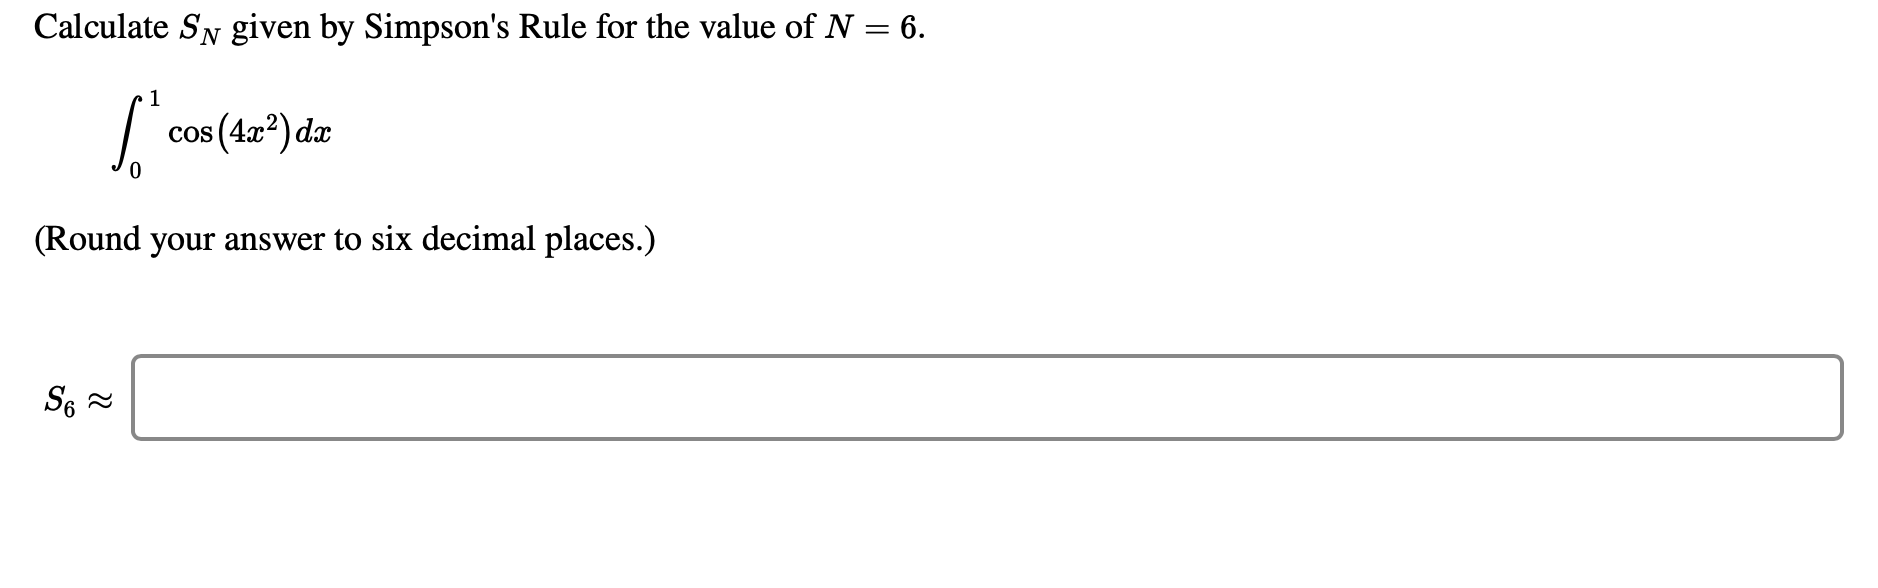 Calculate SN given by Simpson's Rule for the value of N = 6.
1
cos (4x?) dx
(Round your answer to six decimal places.)
